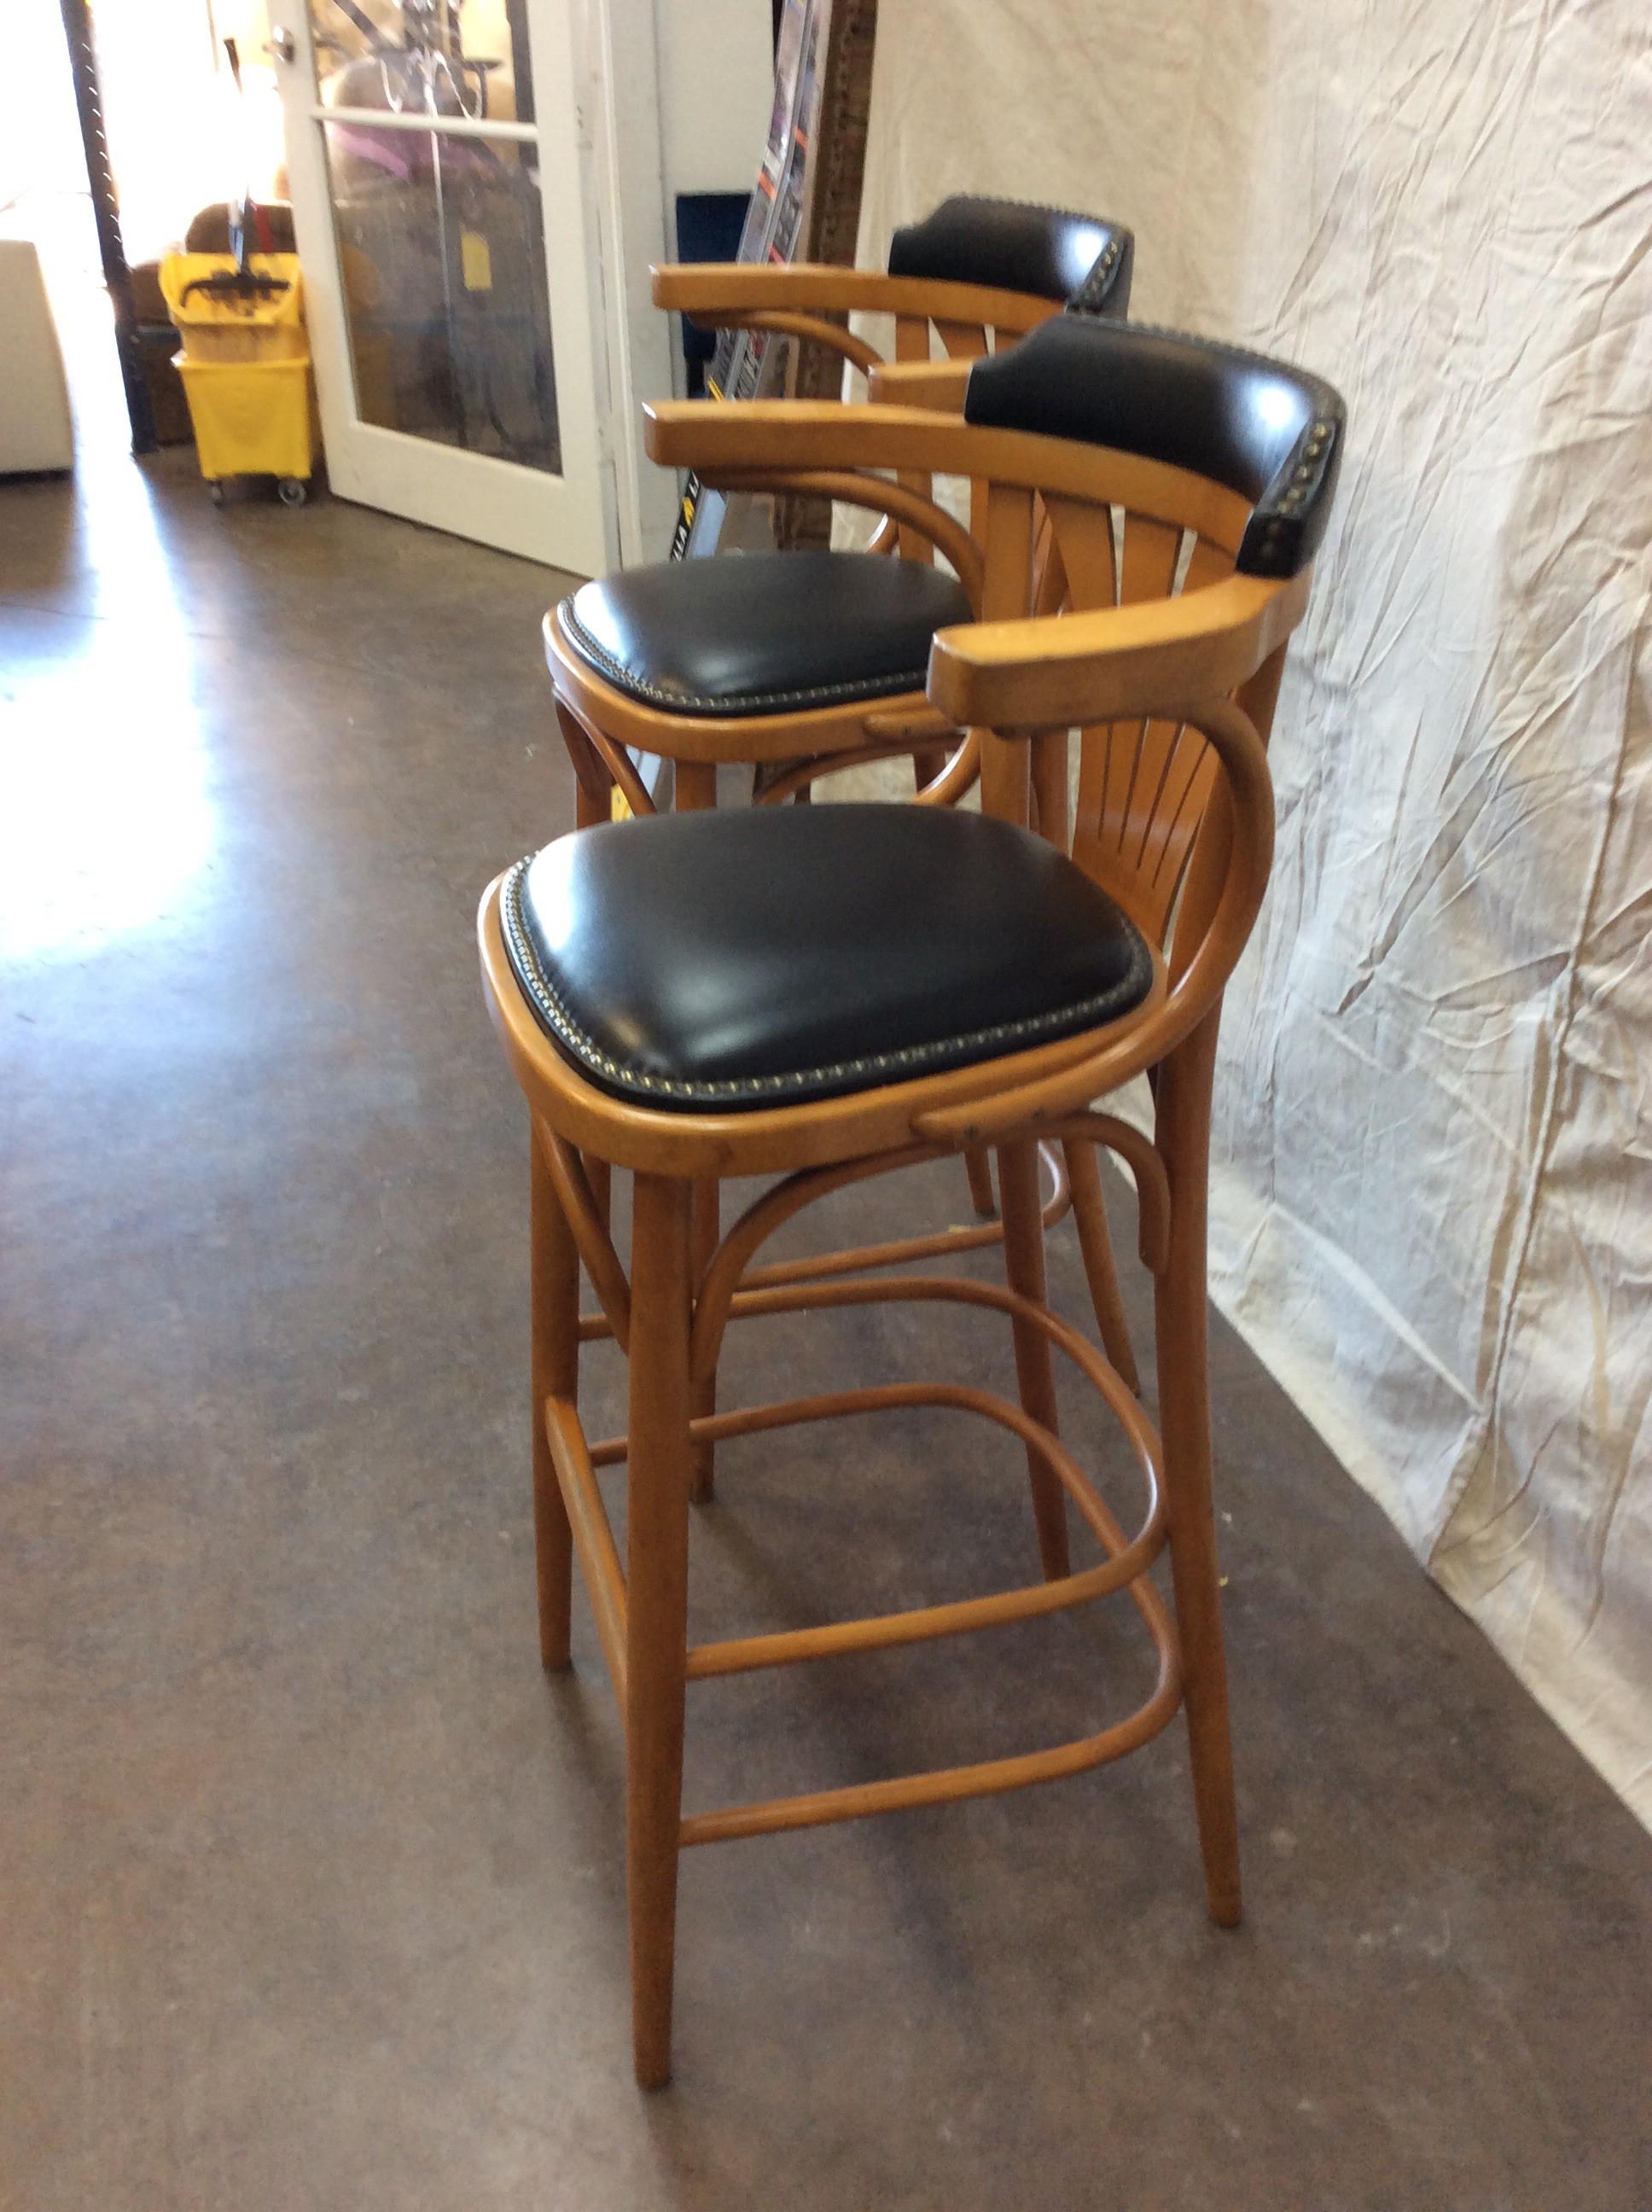 Mid-20th Century French Leather Counter or Barstools, a Pair In Good Condition For Sale In Burton, TX